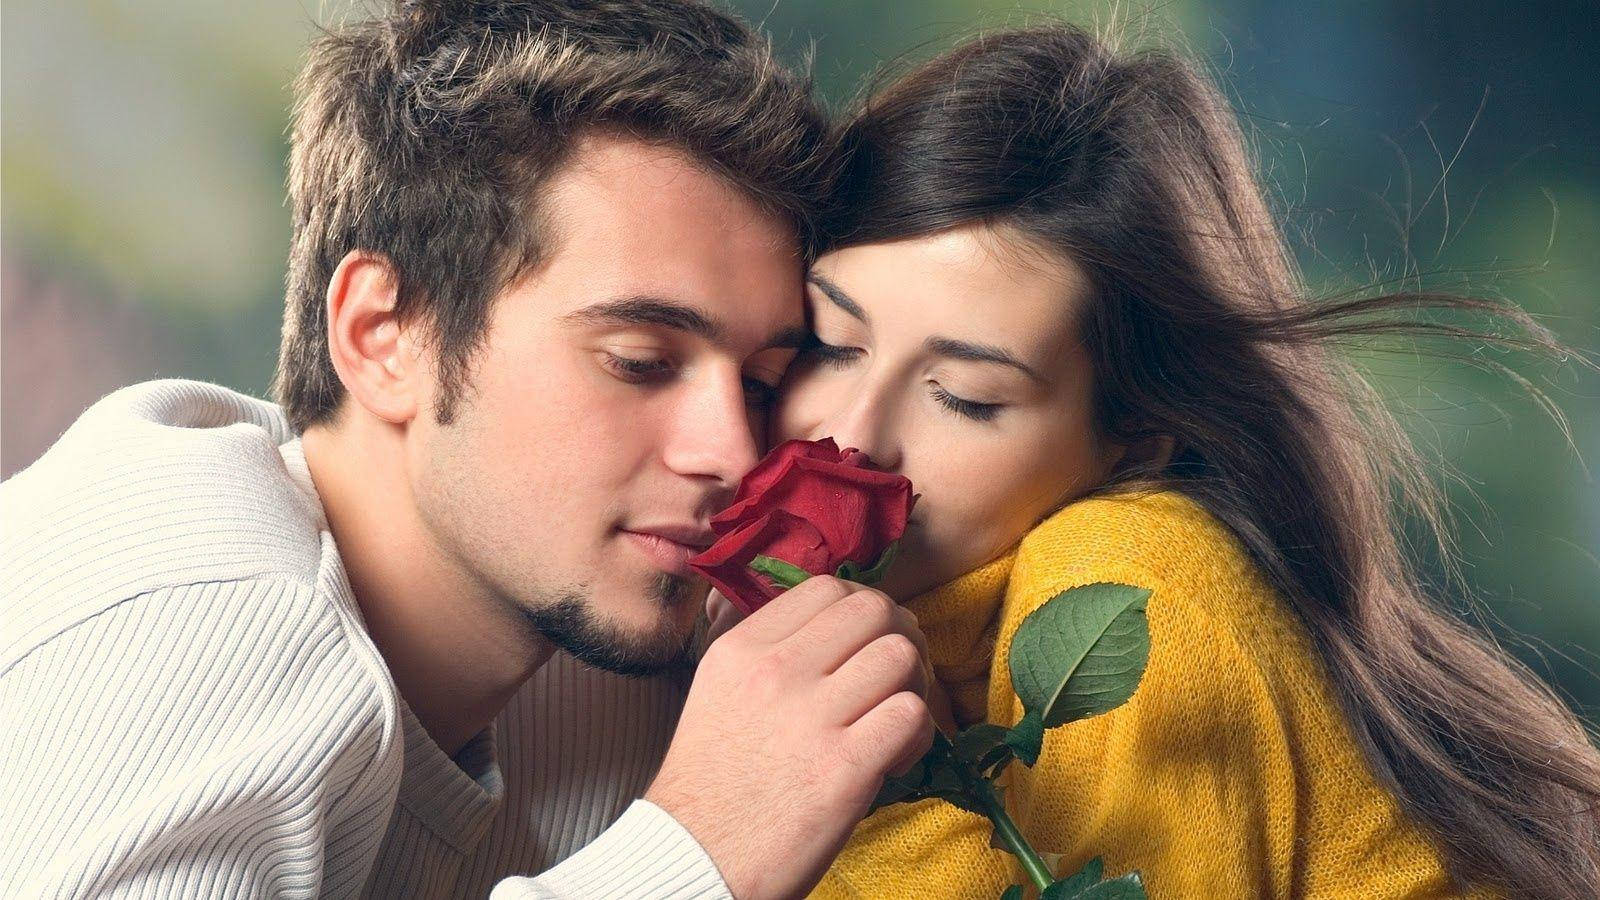 Romantic Couples Smelling A Rose Background